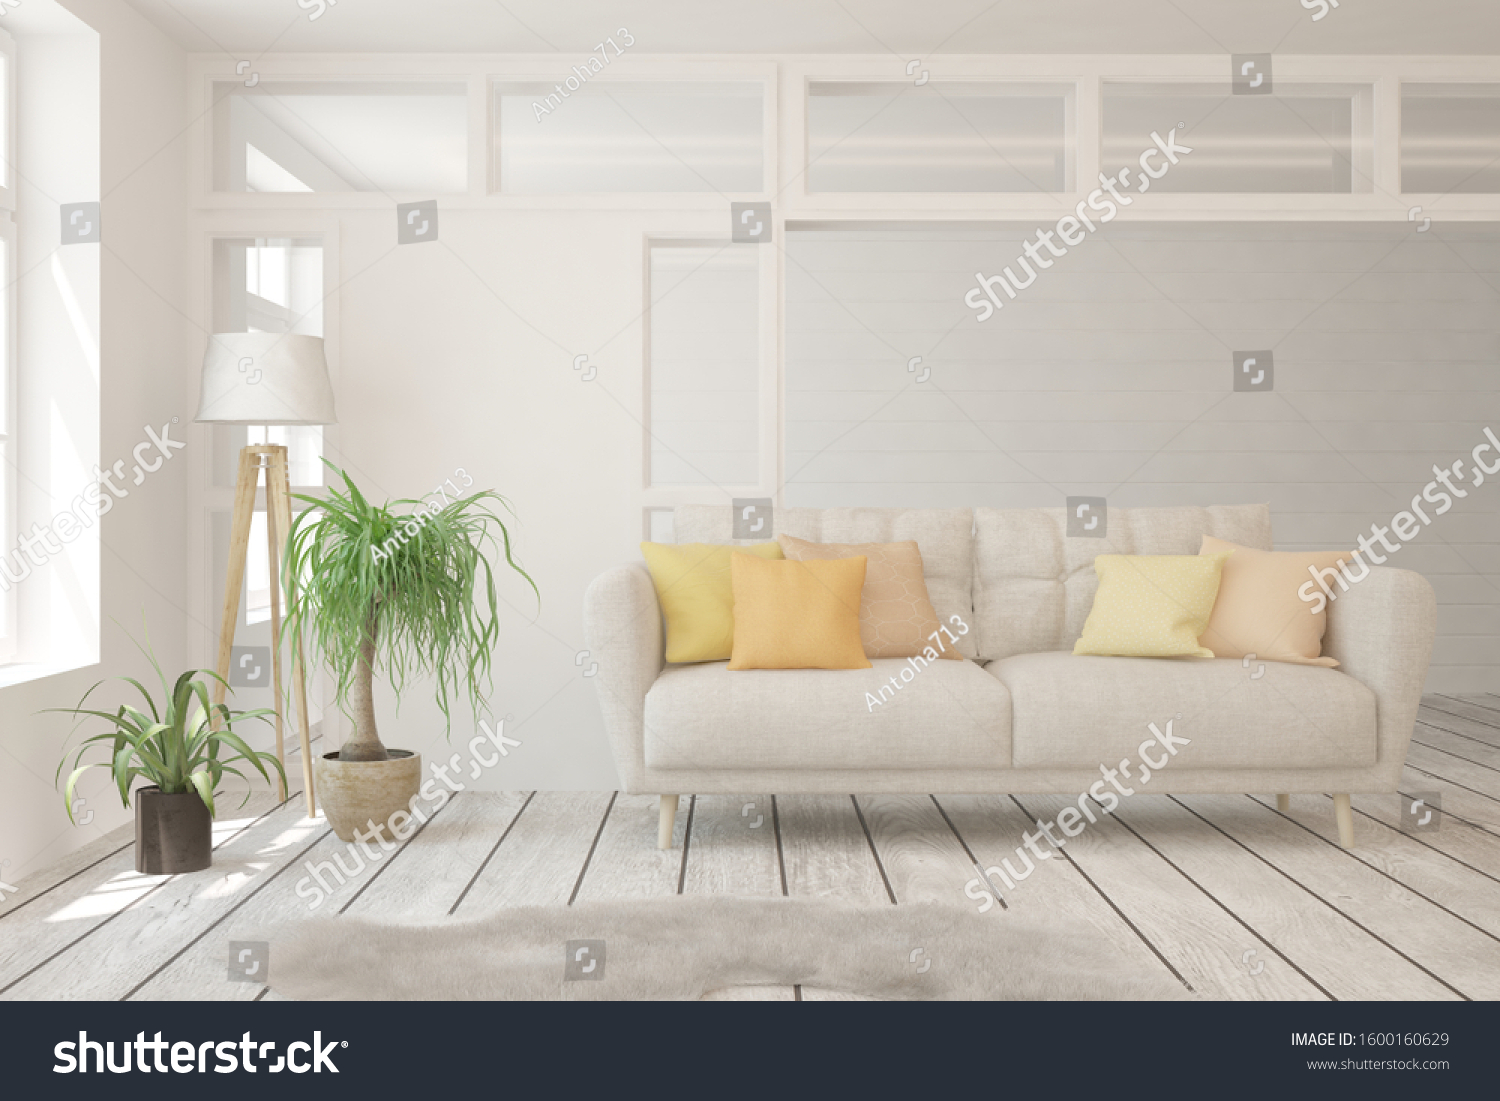 Stylish room in white color with sofa. Scandinavian interior design. 3D illustration #1600160629